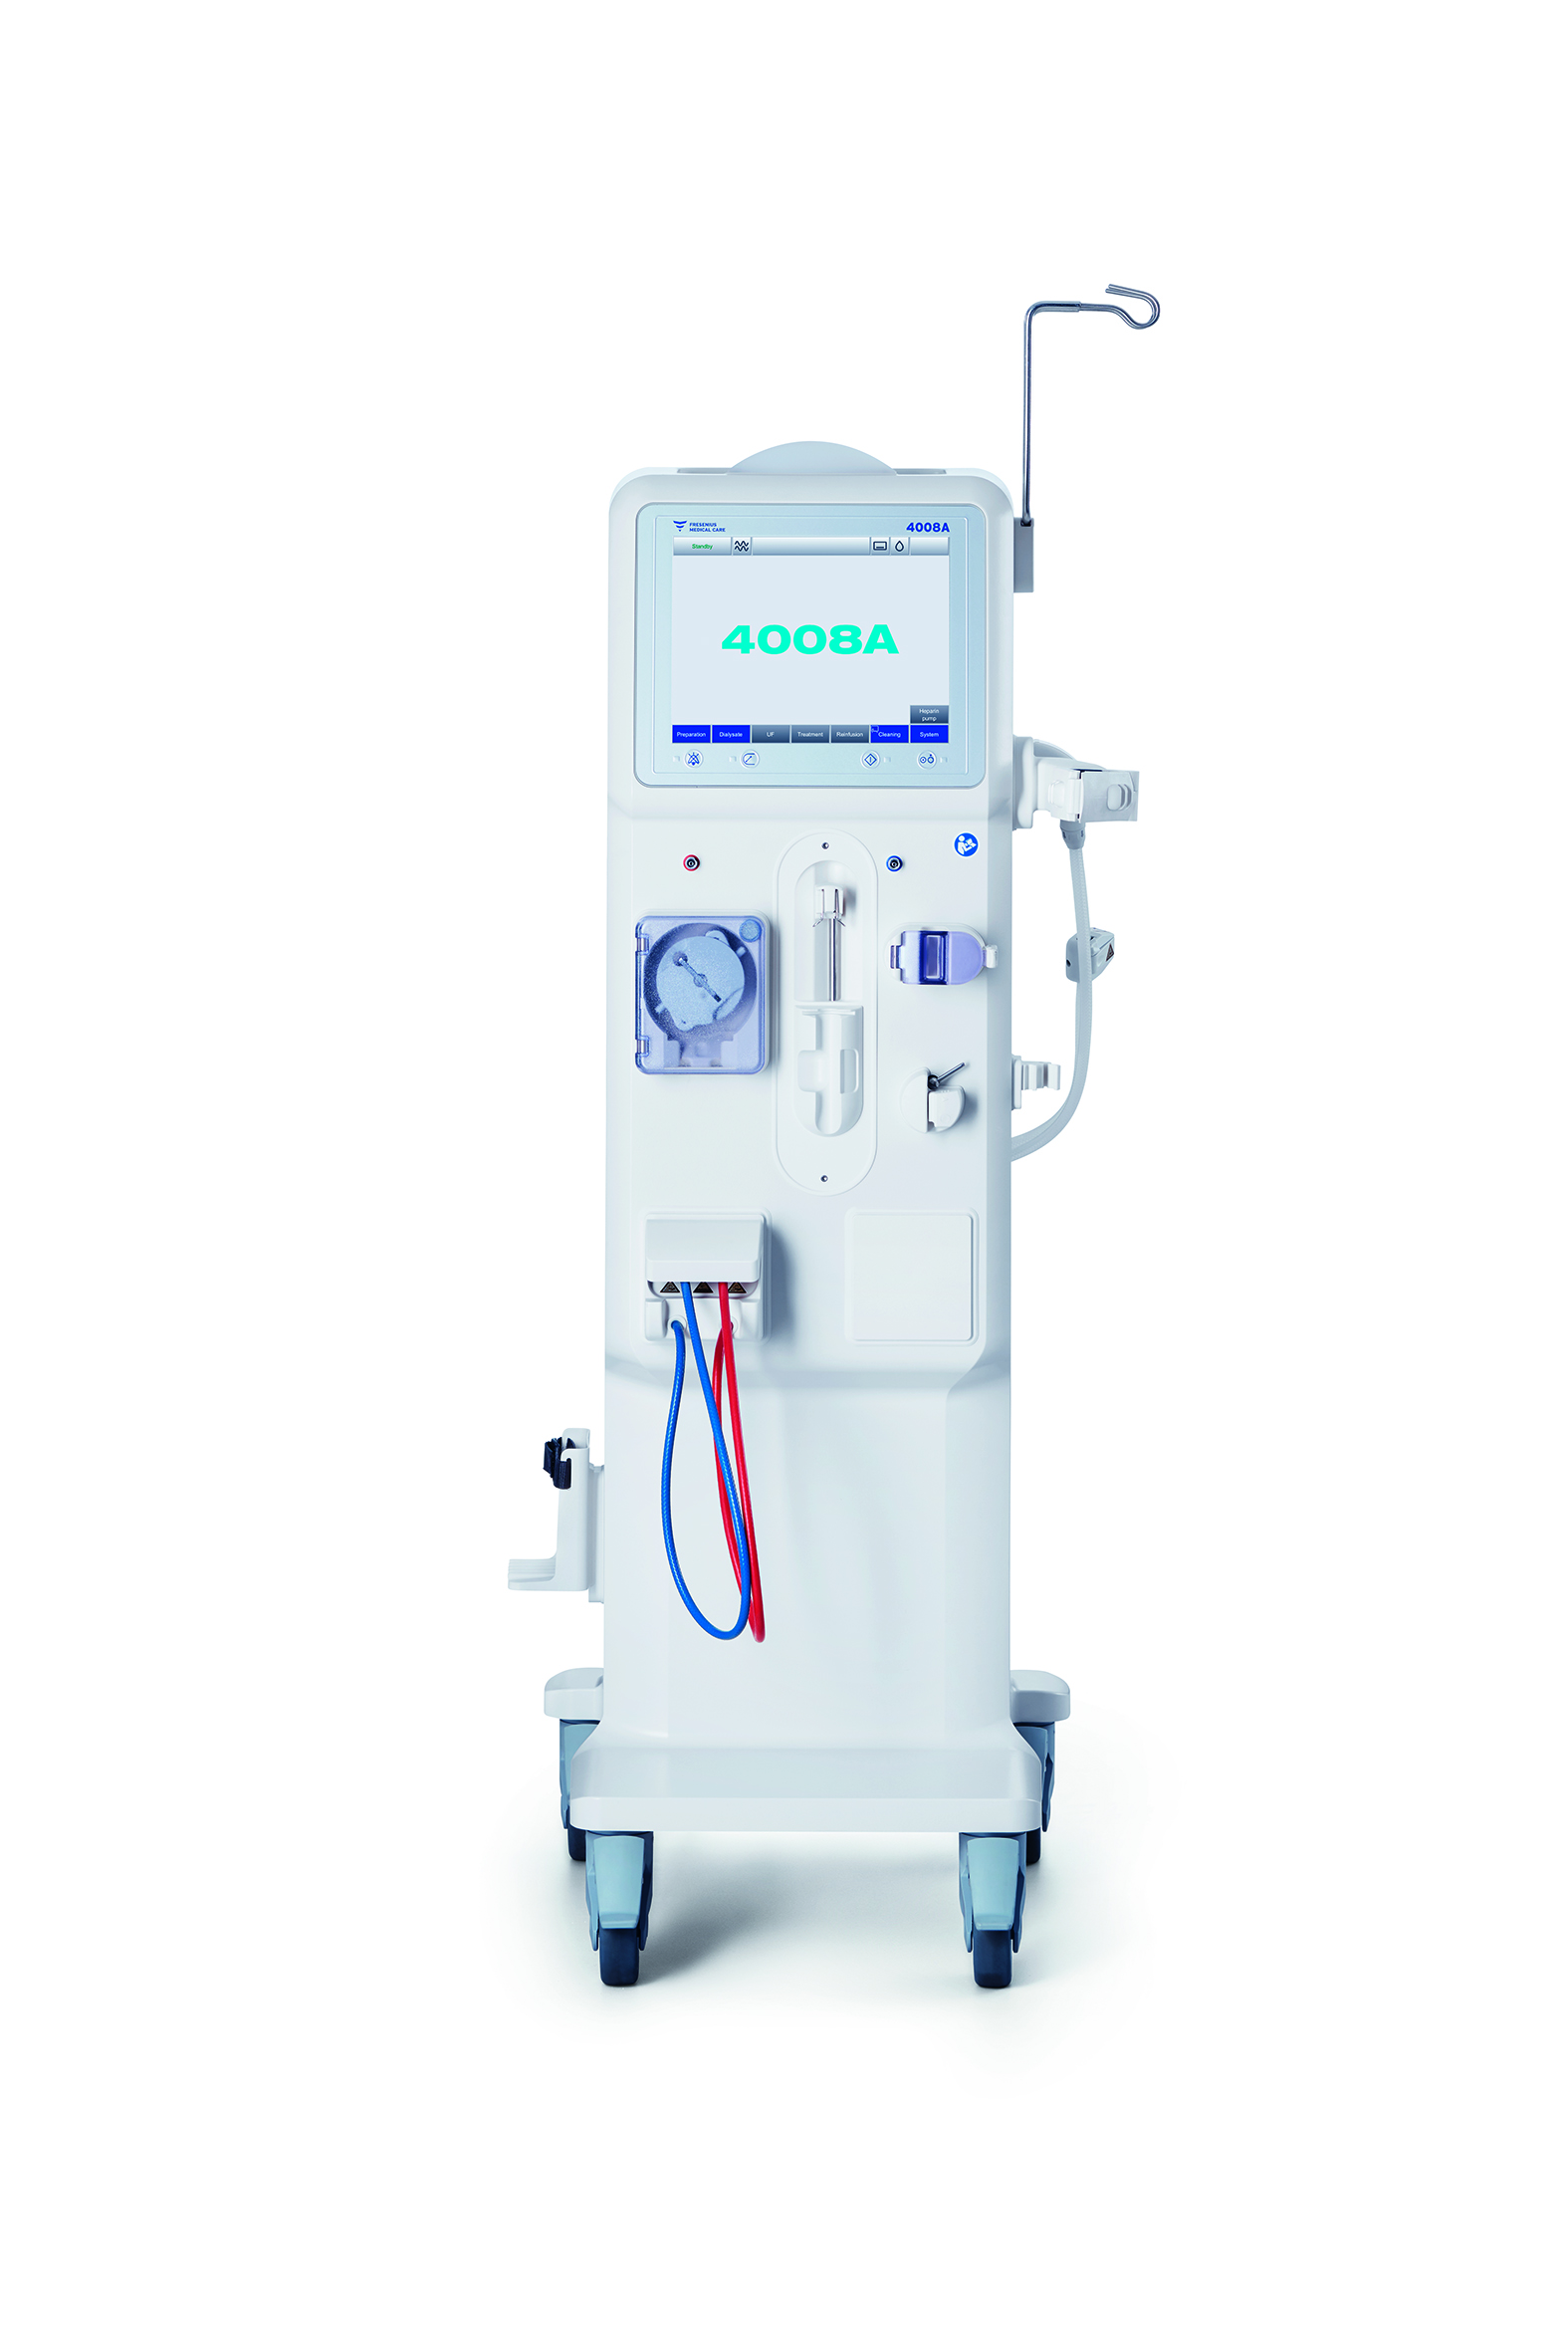 Fresenius Medical Care launched the 4008A dialysis machine, which was especially designed to meet the needs of emerging markets.